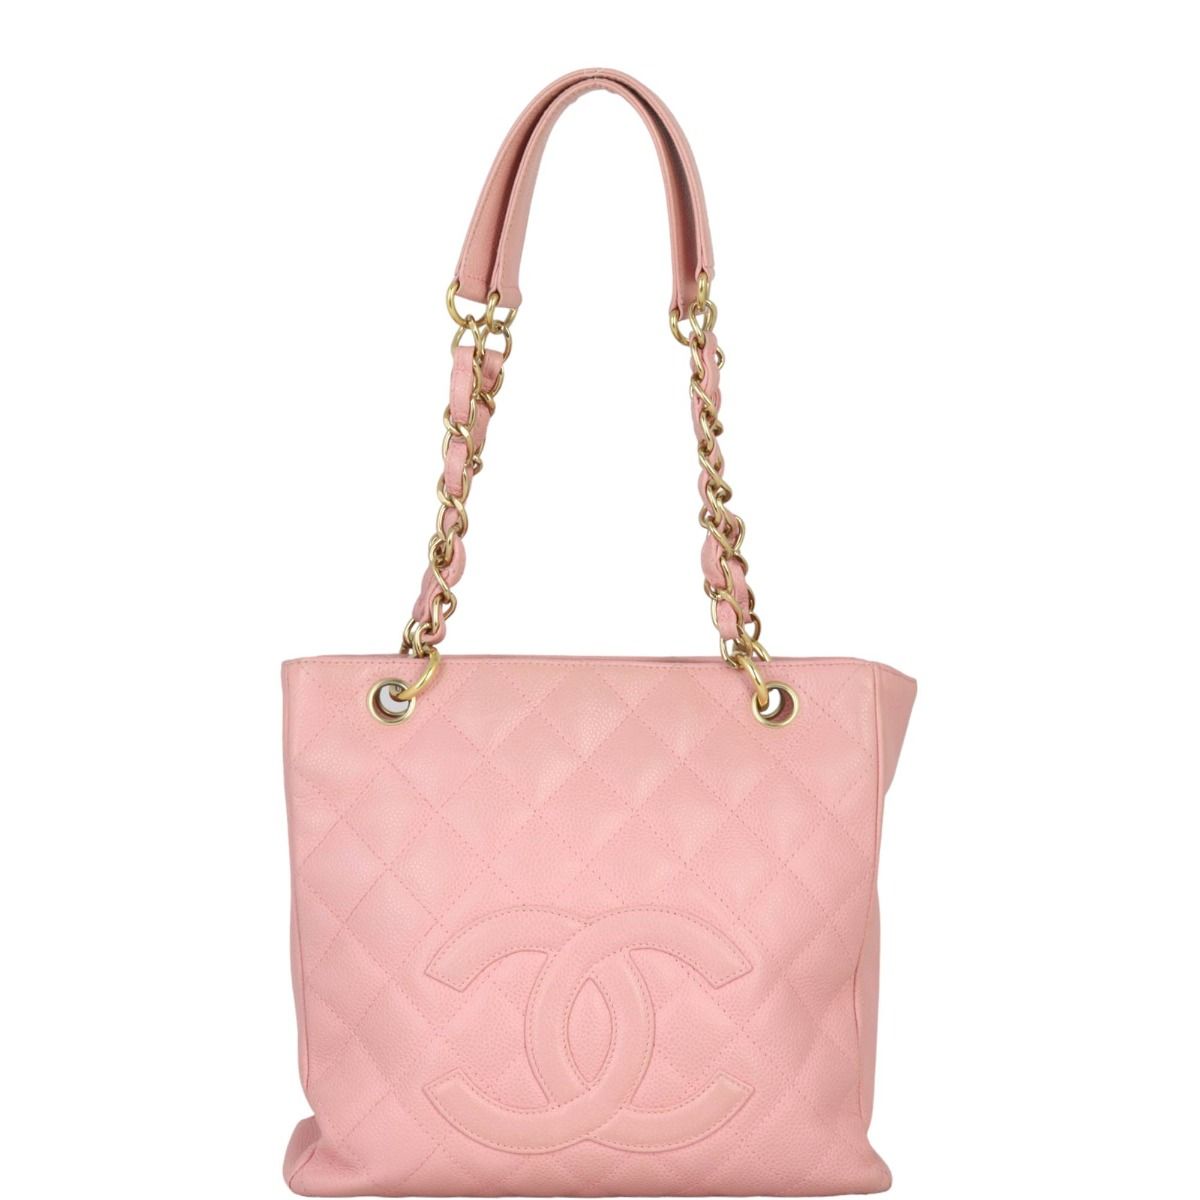 Chanel - White Quilted Caviar Petite Shopping Tote (PST)